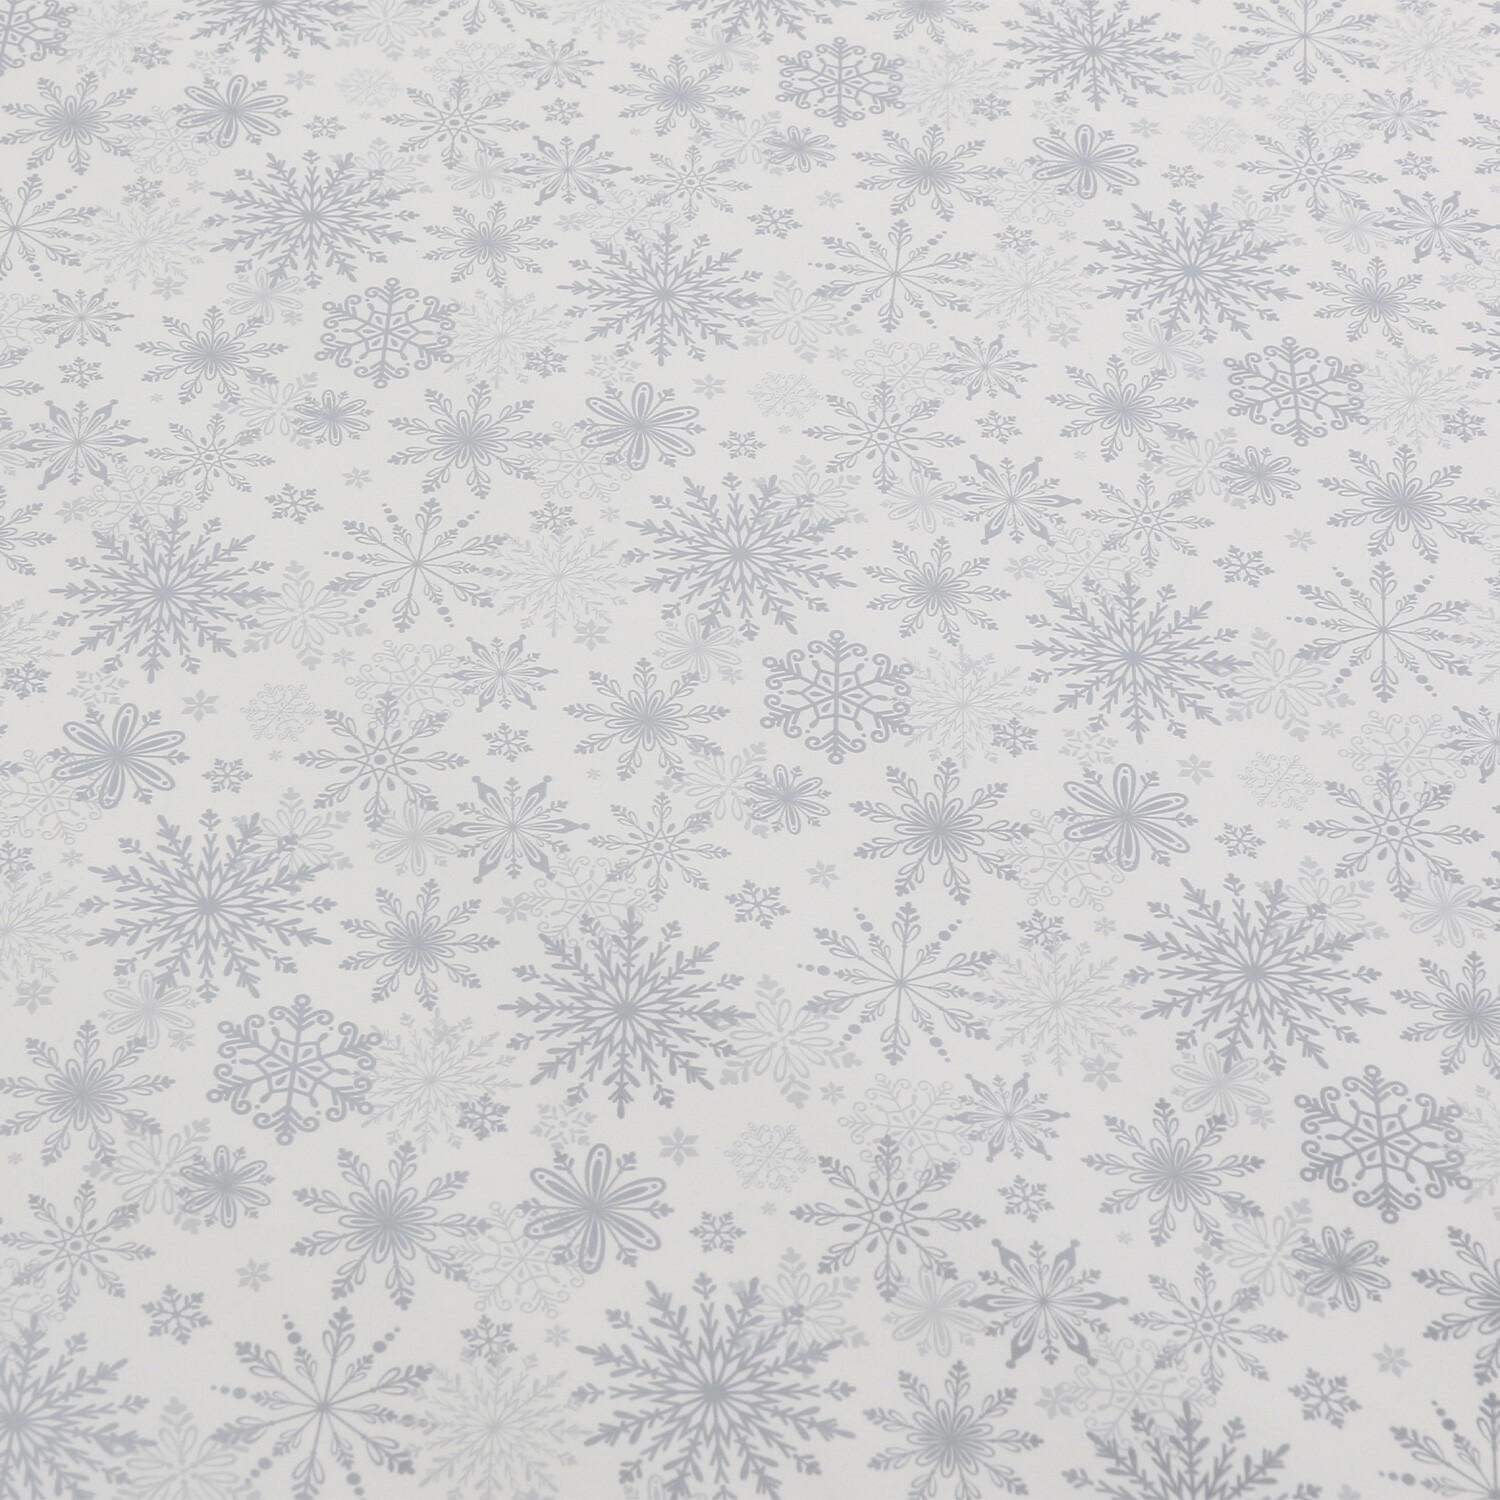 Silver Snowflake Wrapping Paper 4m - Silver Image 1